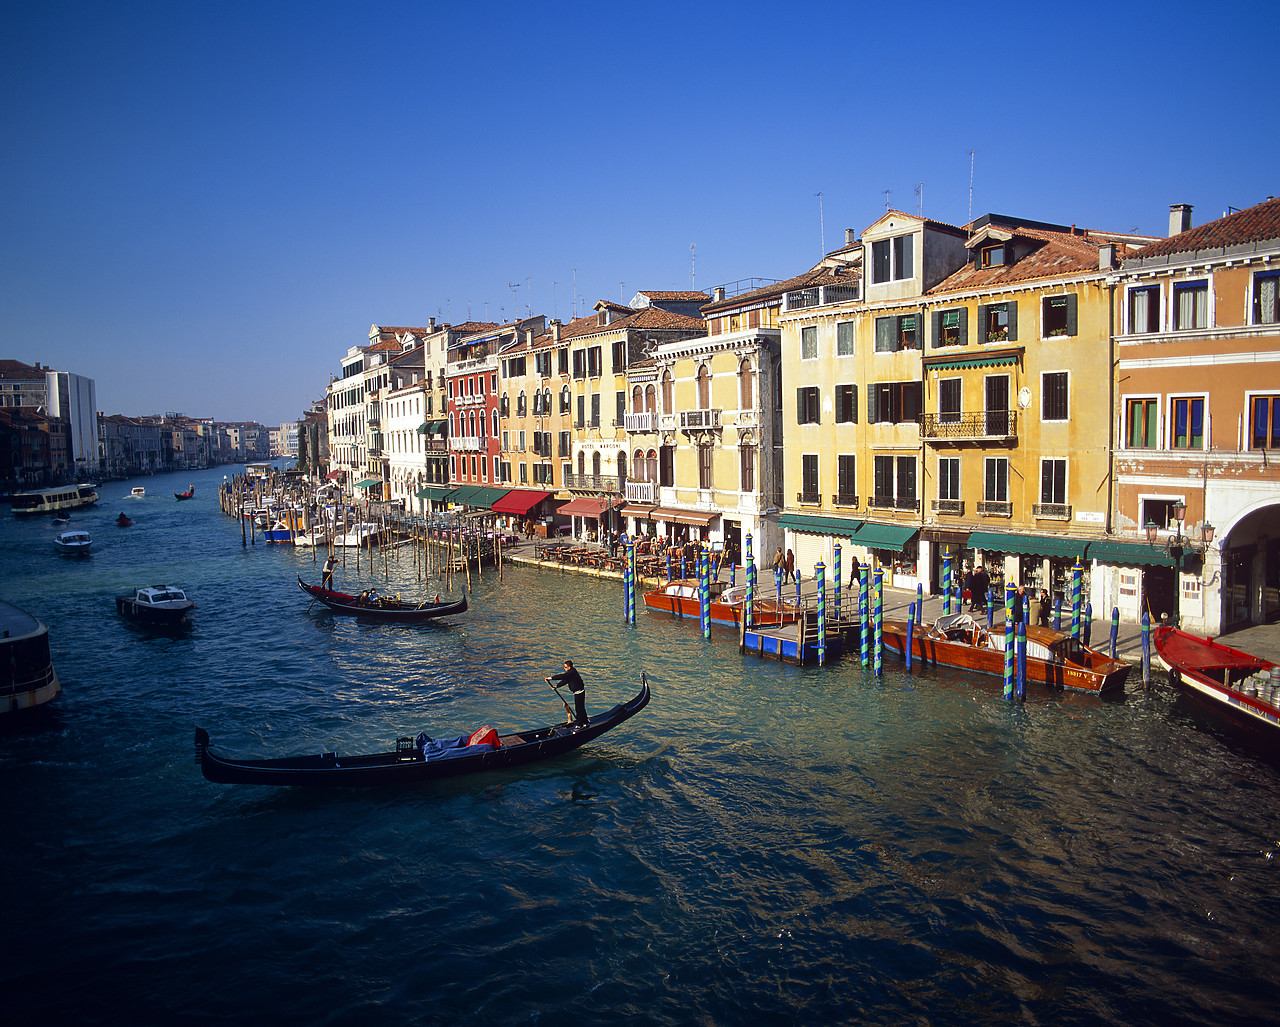 #010152-1 - The Grand Canal, Venice, Italy